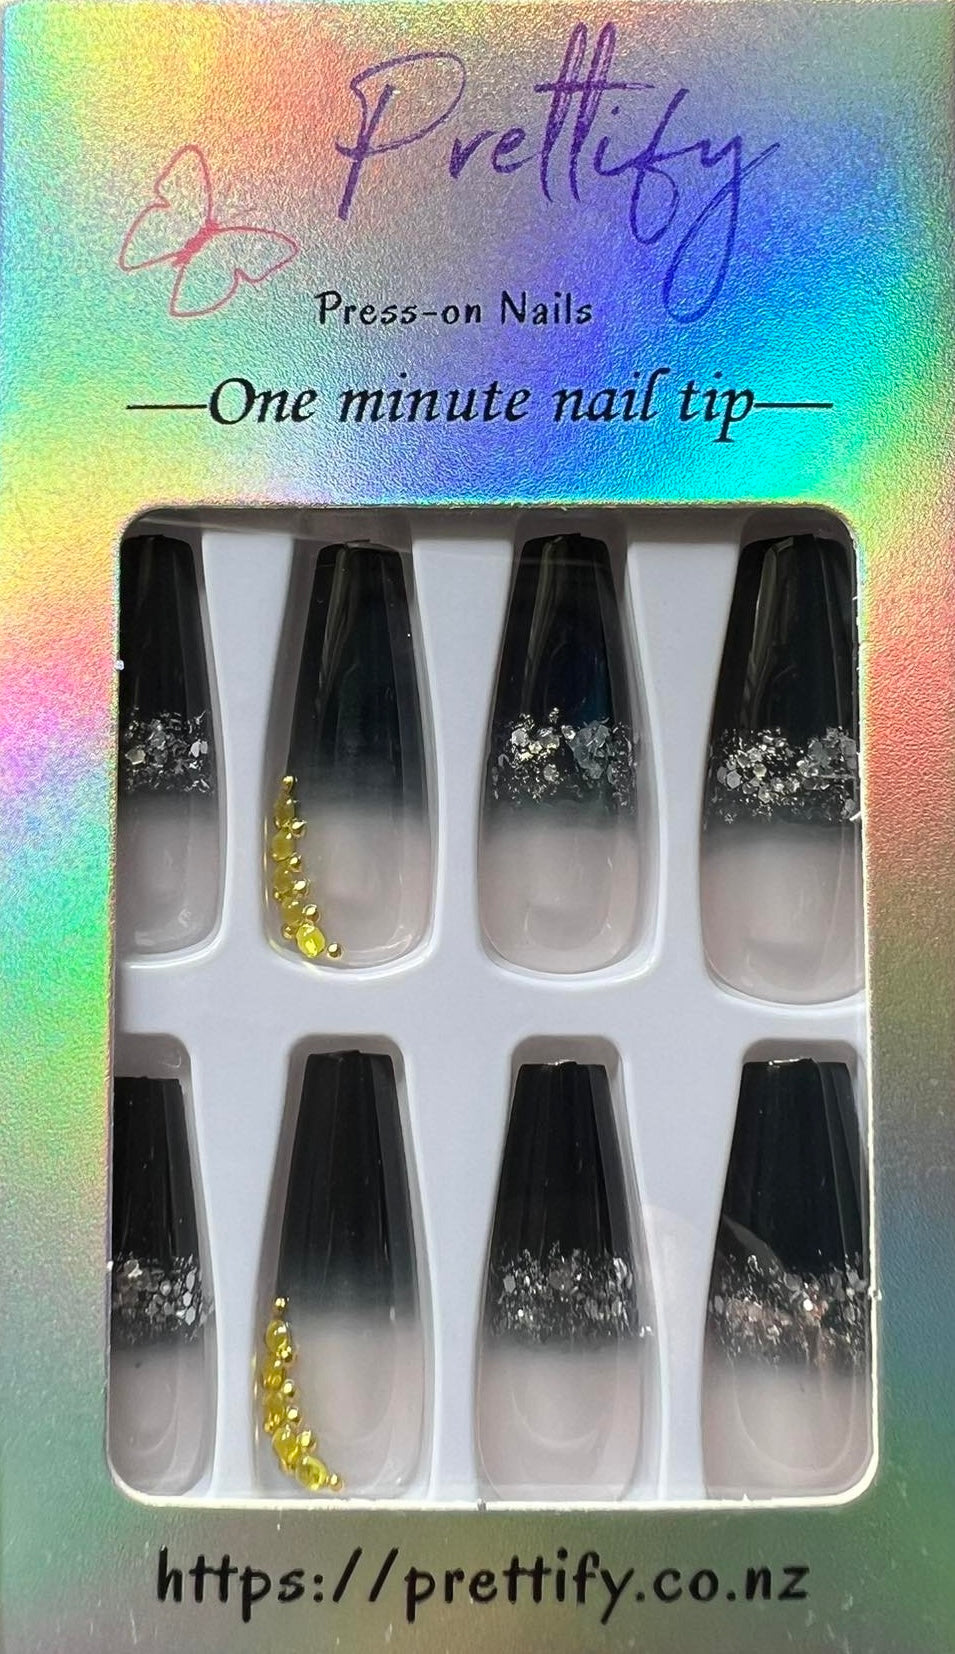 Long Coffin Press on Nails. Black & Clear with Silver Glitter & Gold Jewels. Easy and quick to apply. Great for those special occasions, parties or add an edge to any outfit. Gorgeous, flattering and you can re-use them again and again.